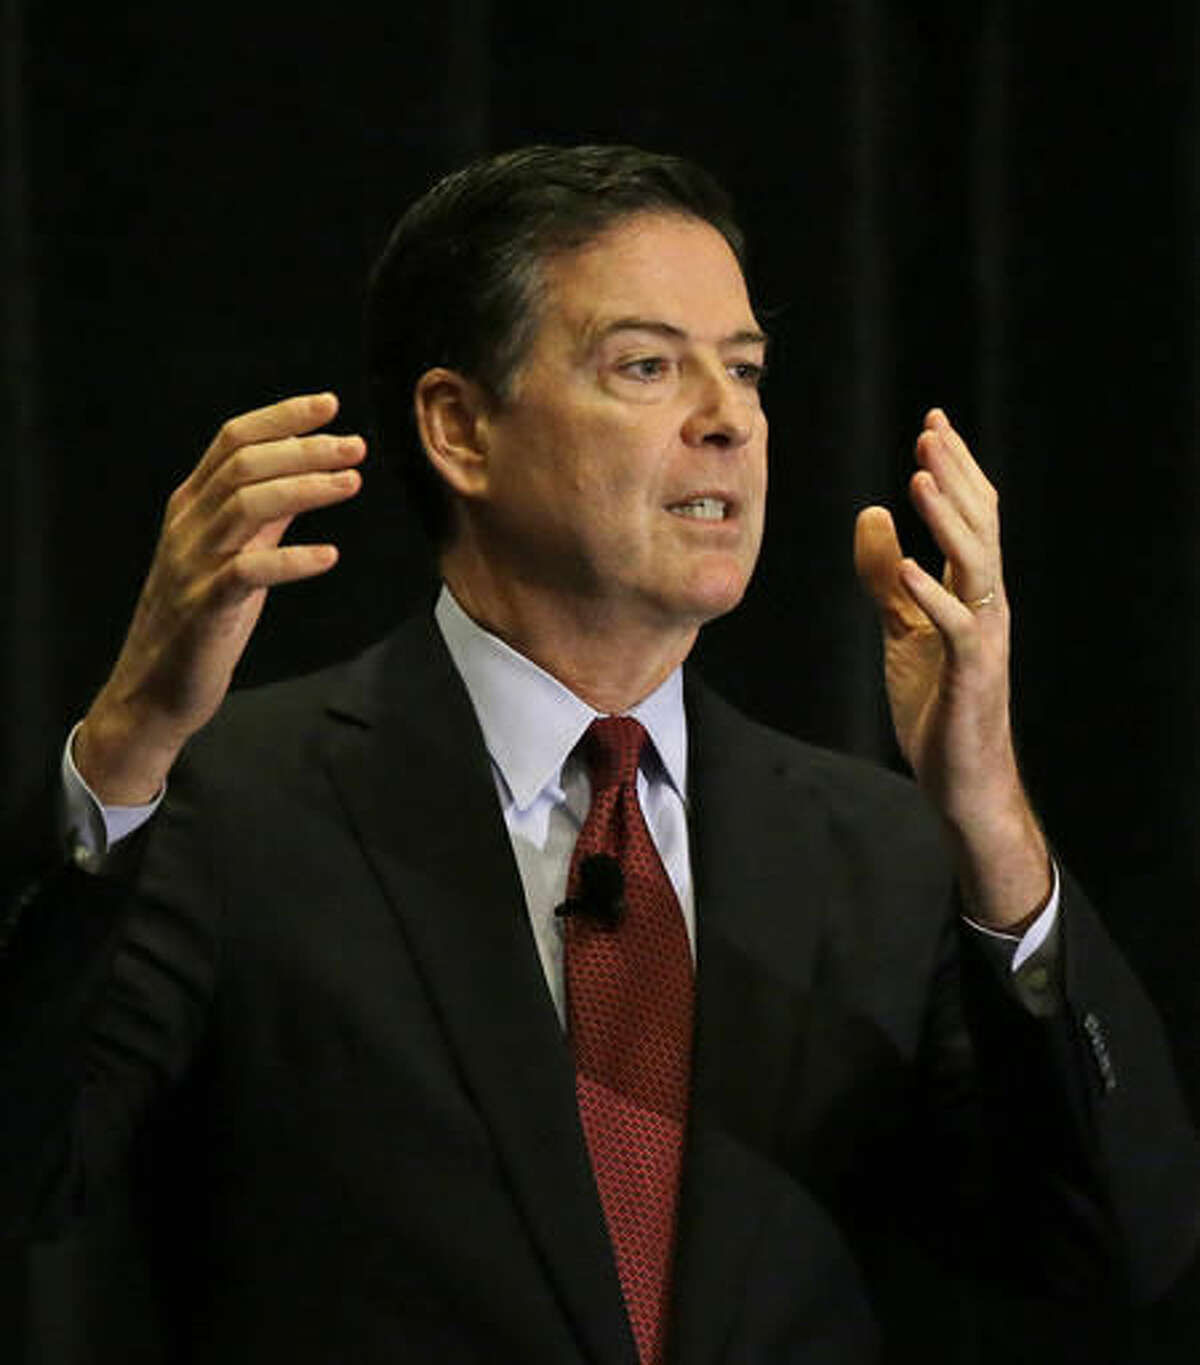 FBI Director James Comey gestures during an address to the American Bar Association annual meeting Friday, Aug. 5, 2016, in San Francisco. (AP Photo/Eric Risberg)